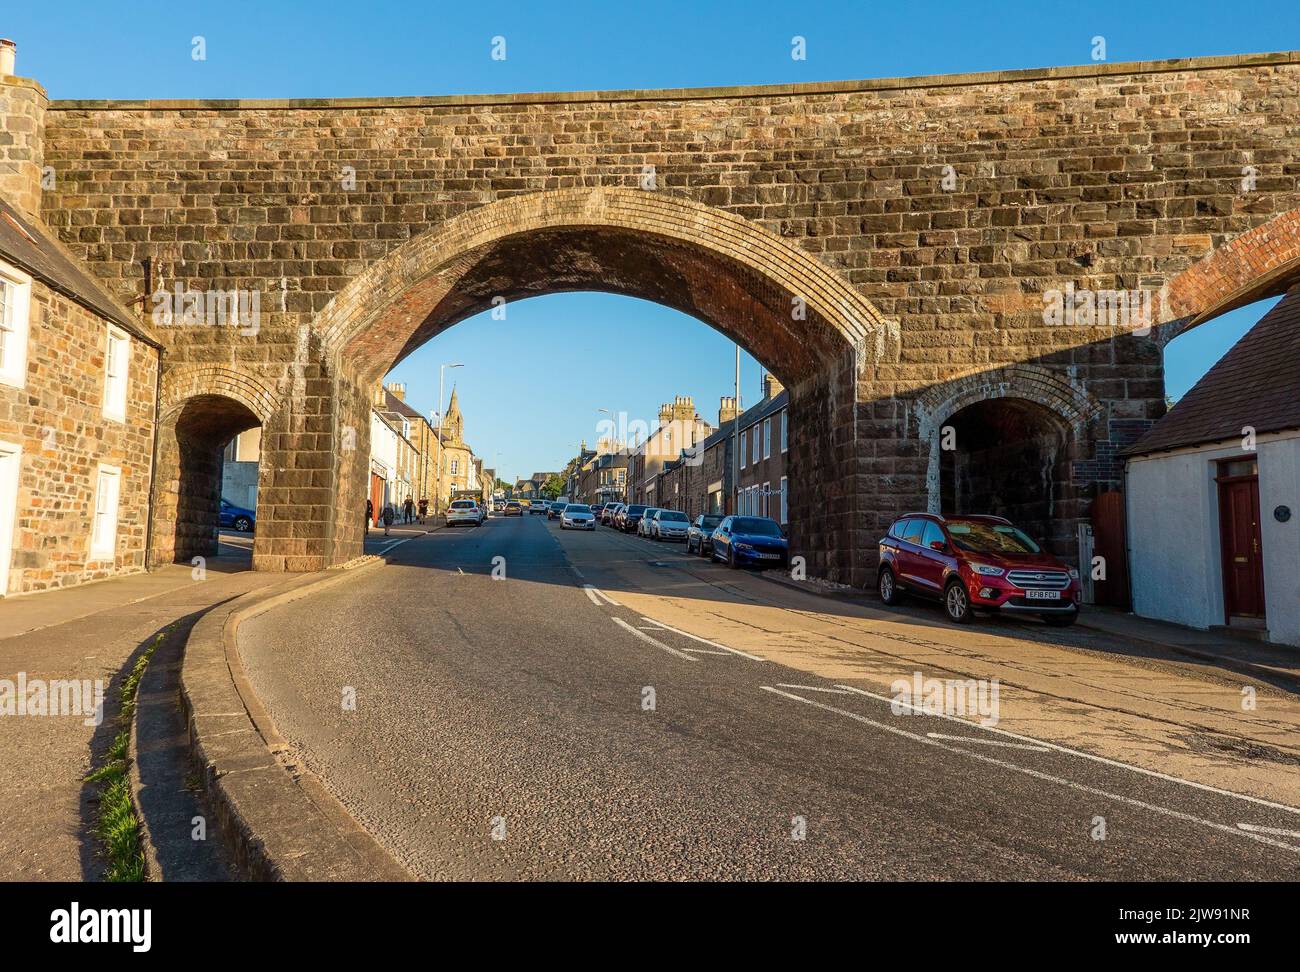 Arch of a disused railway line leading into the town of Cullen, Moray, Scotland, UK Stock Photo